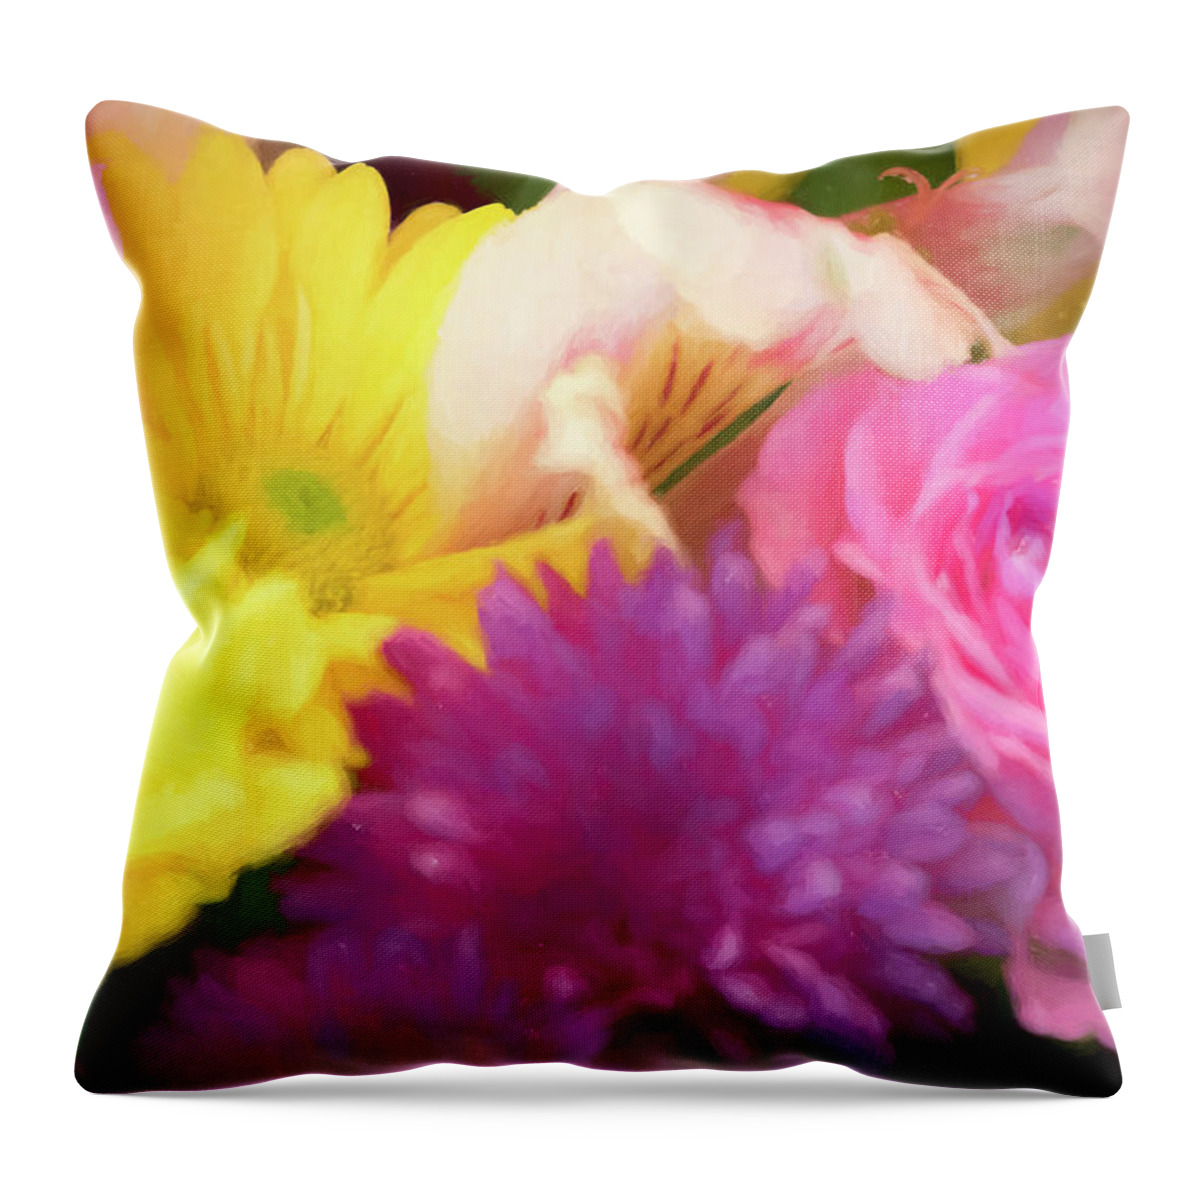 Flowers Throw Pillow featuring the photograph Flowers by Artful Imagery